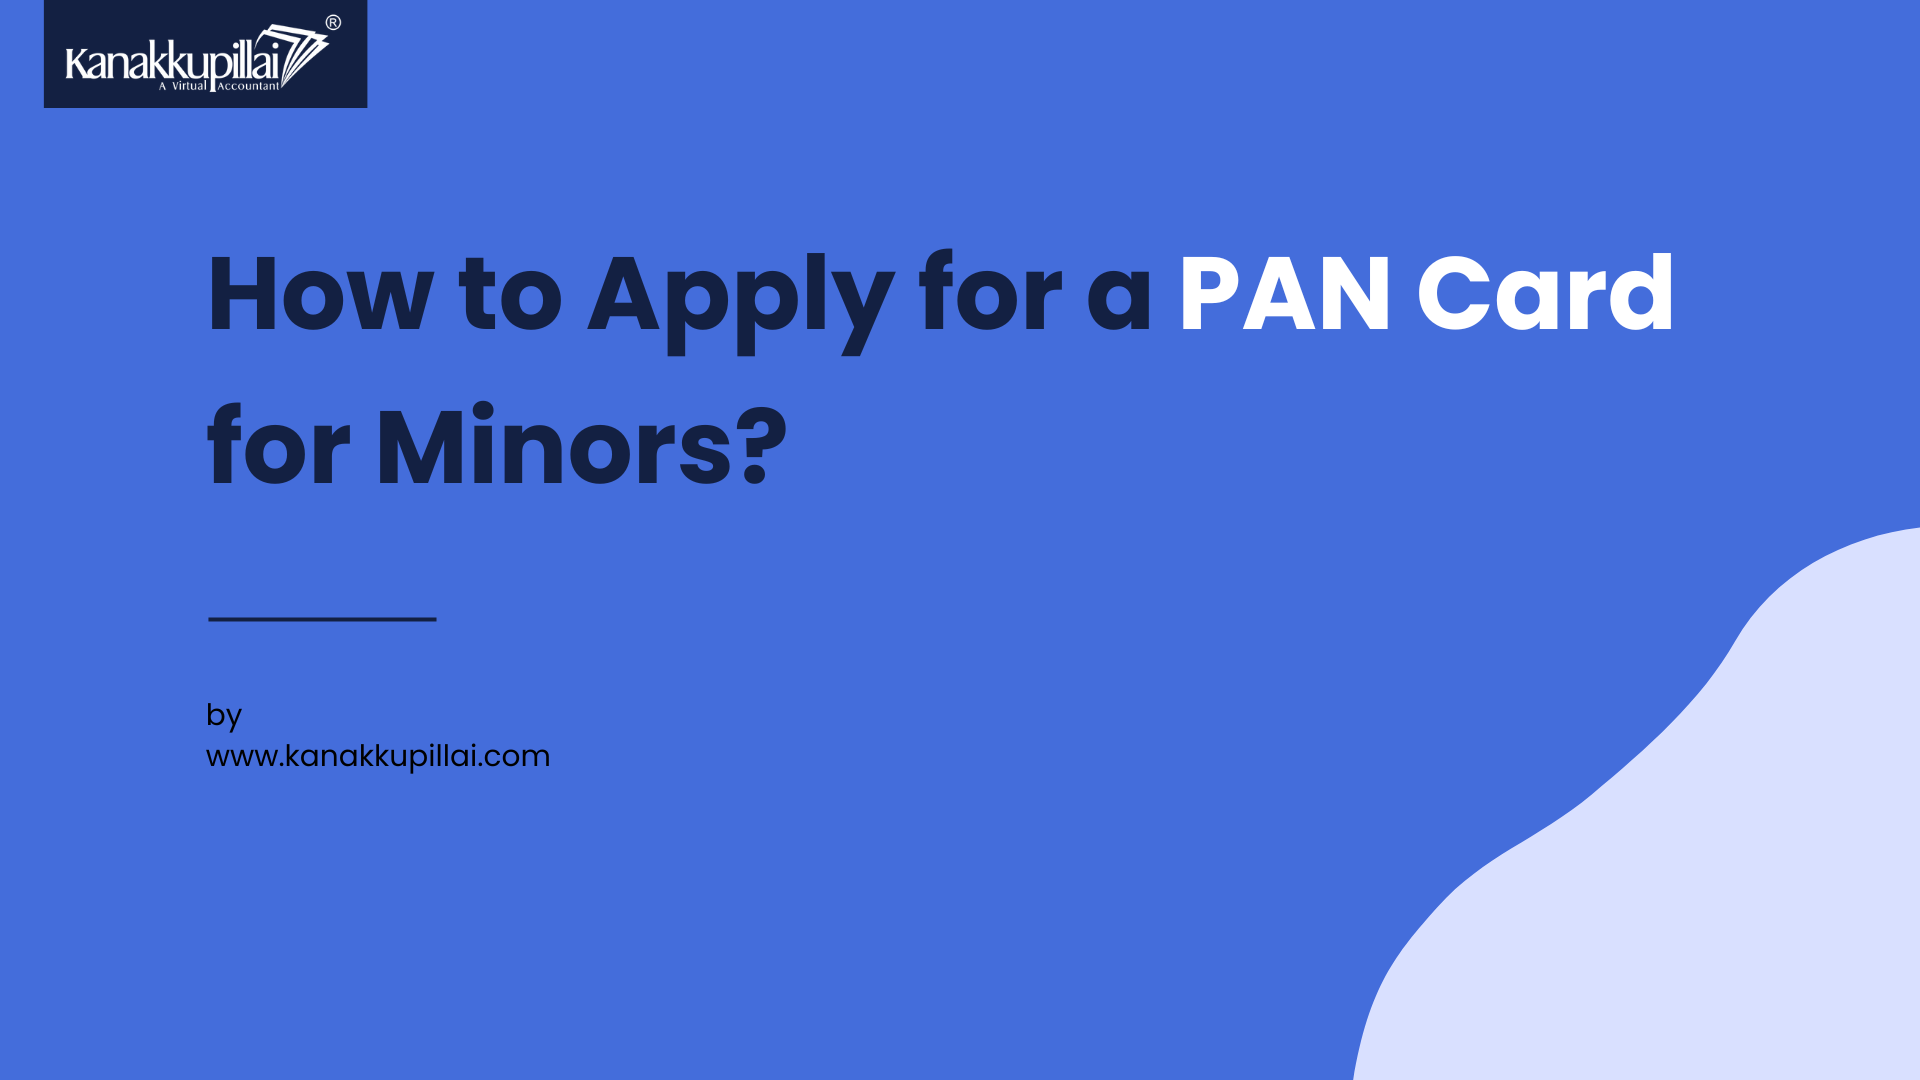 How to Apply for a PAN Card for Minors